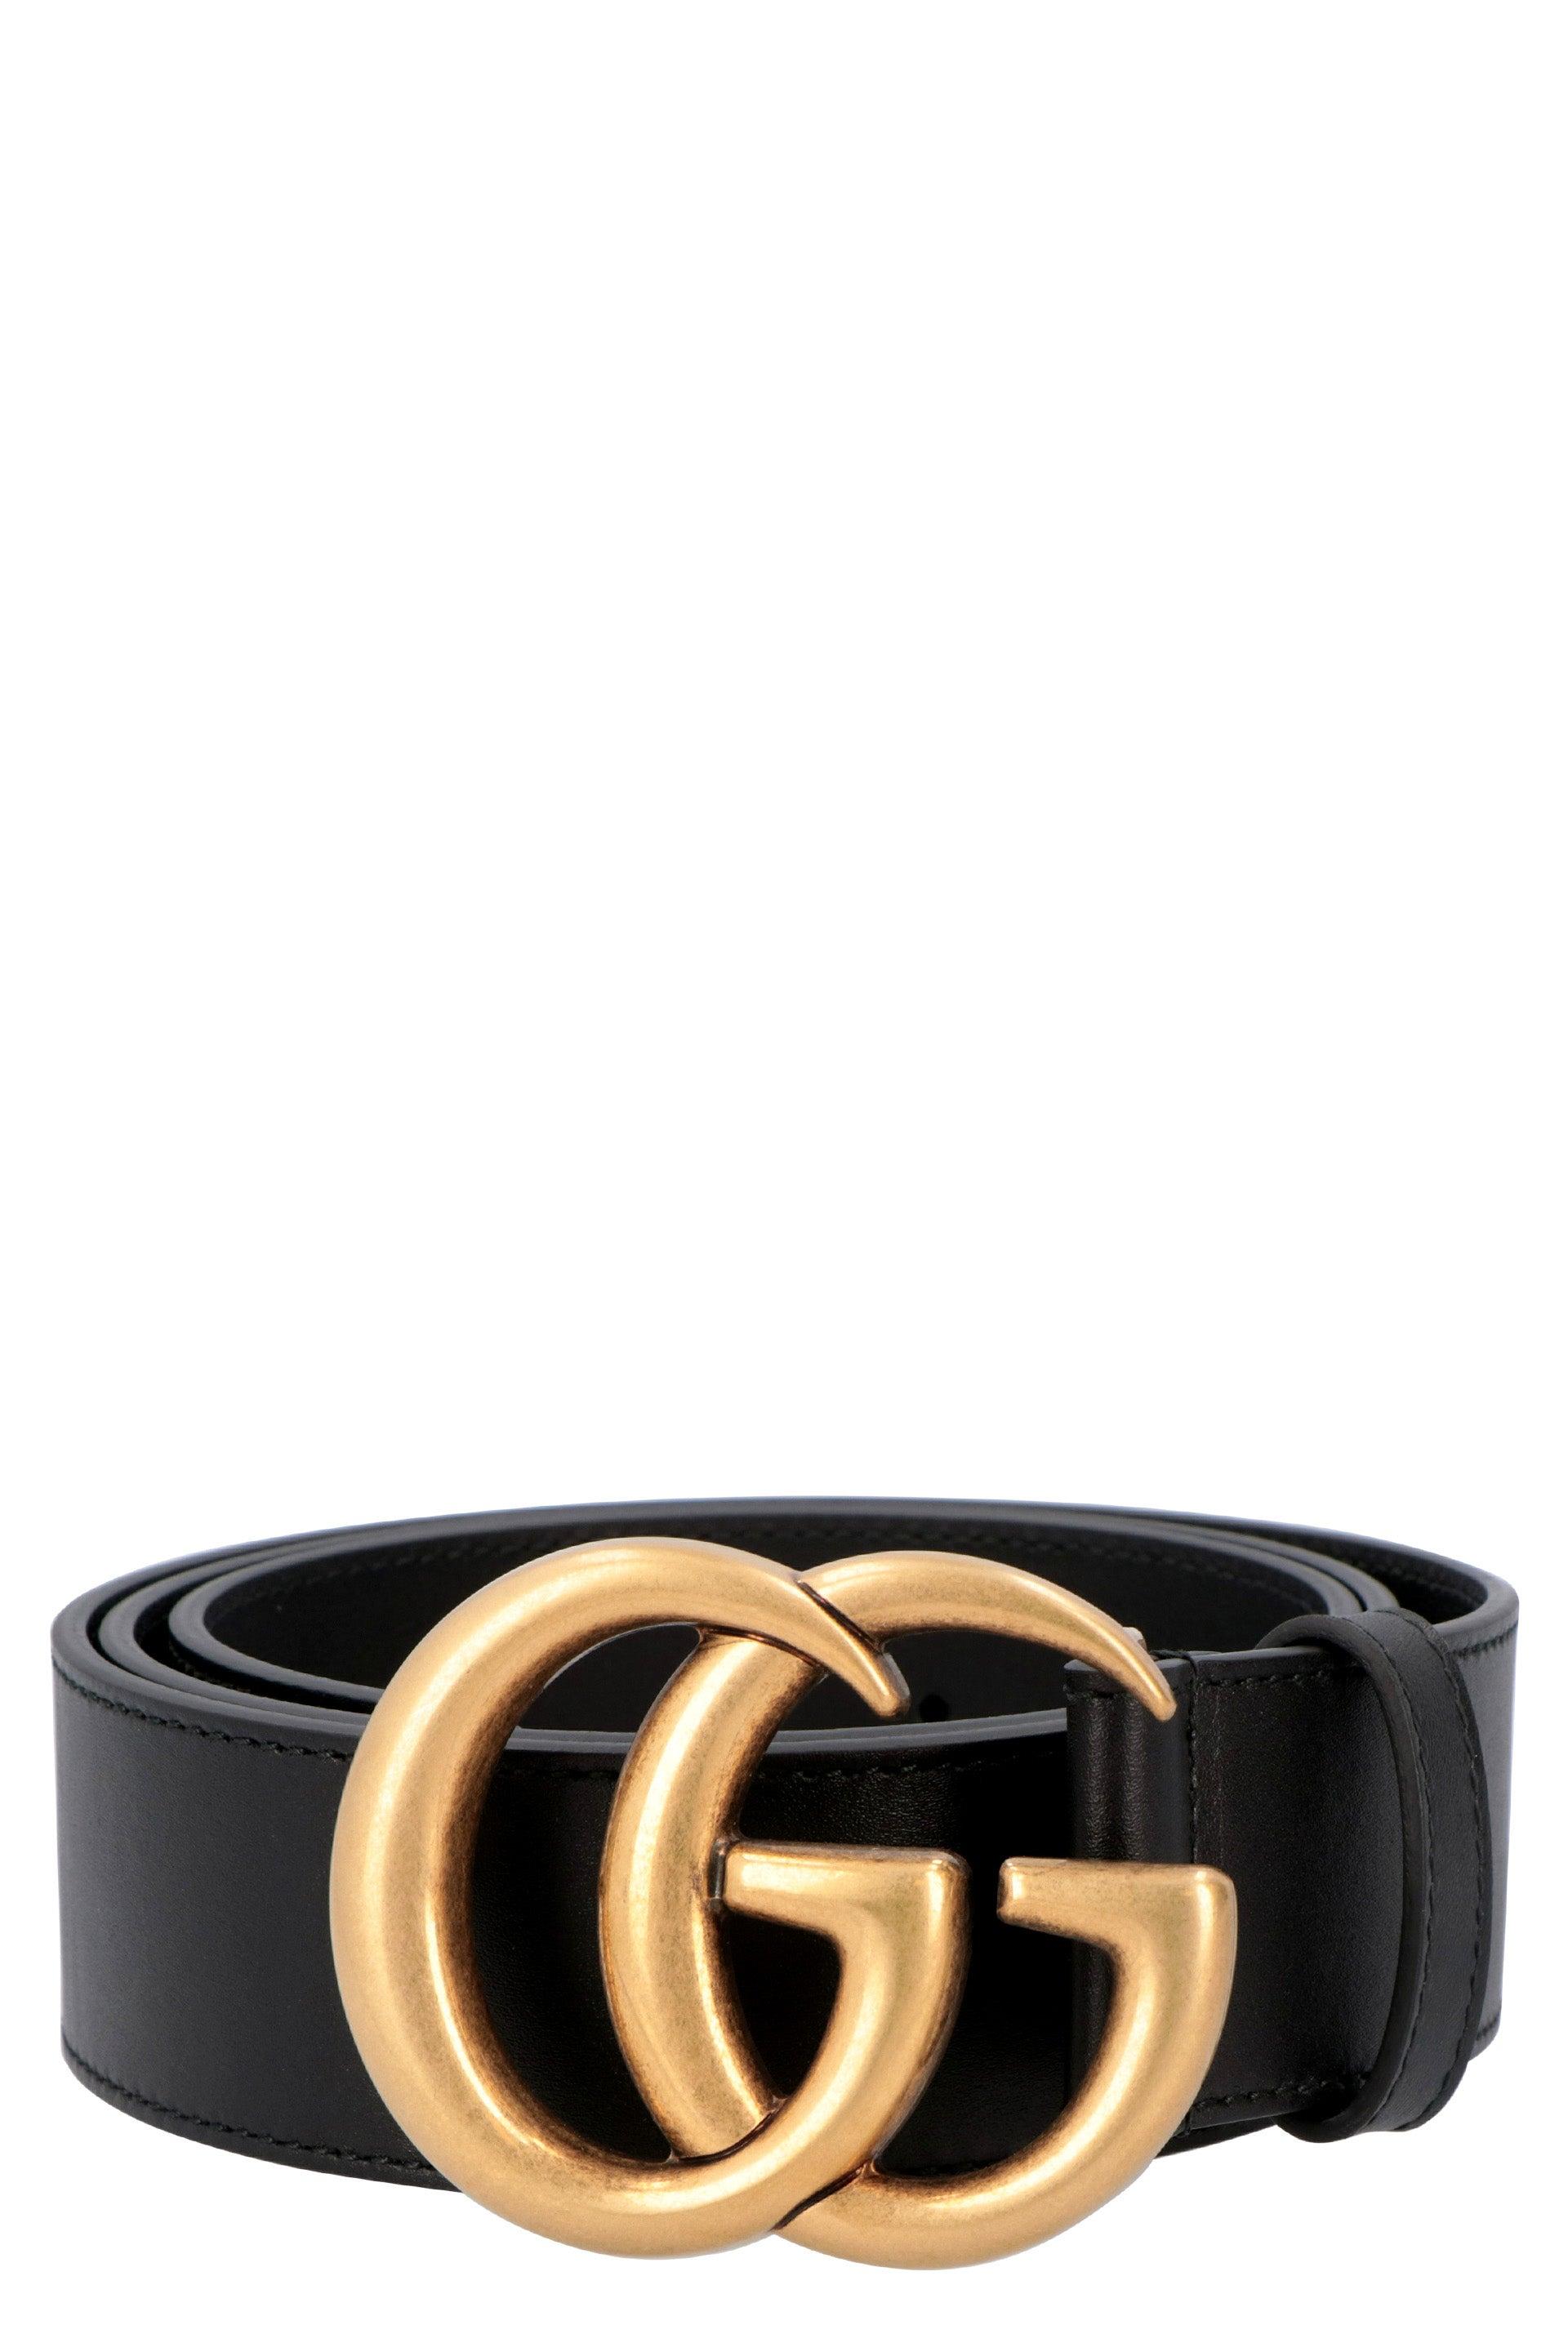 Gucci GG Buckle Leather Belt in Black | Lyst